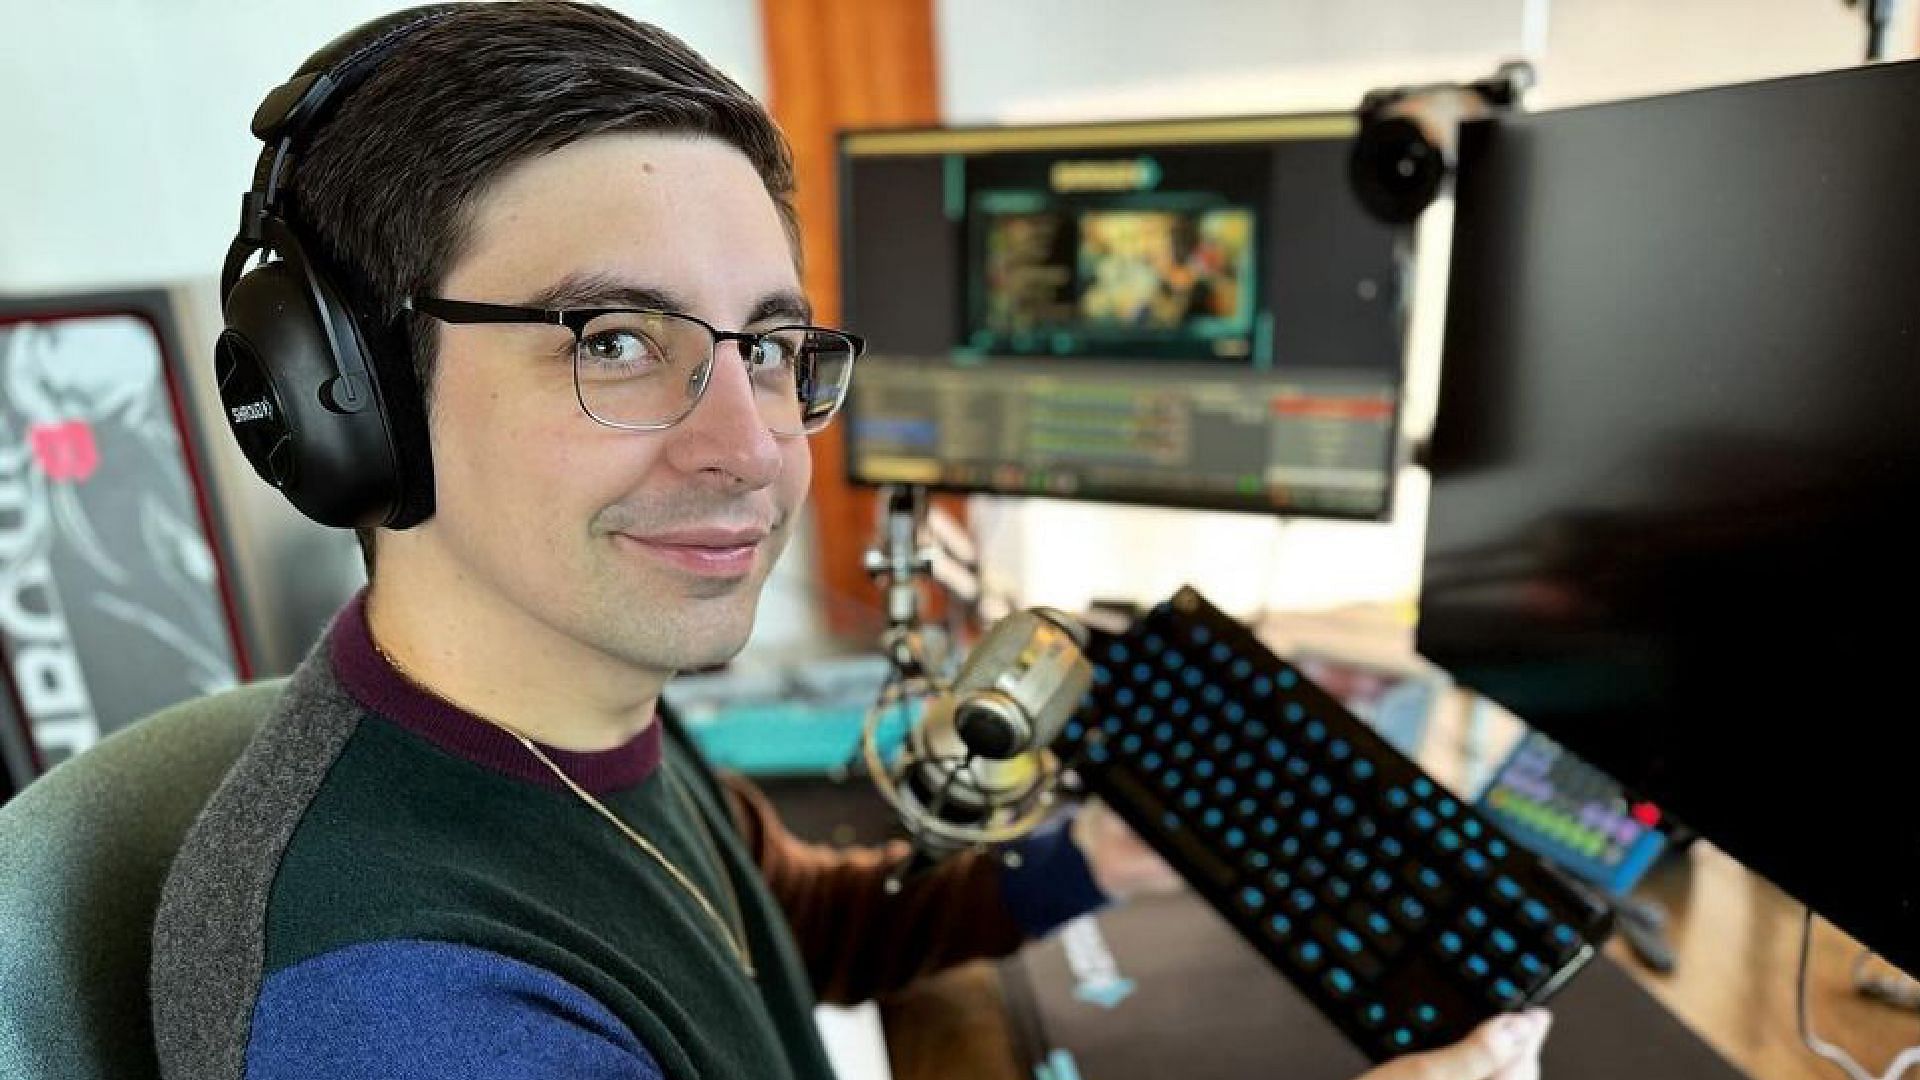 Shroud is a former multi-game professional known for his skilled playing style. (Image via shroud/Instagram)